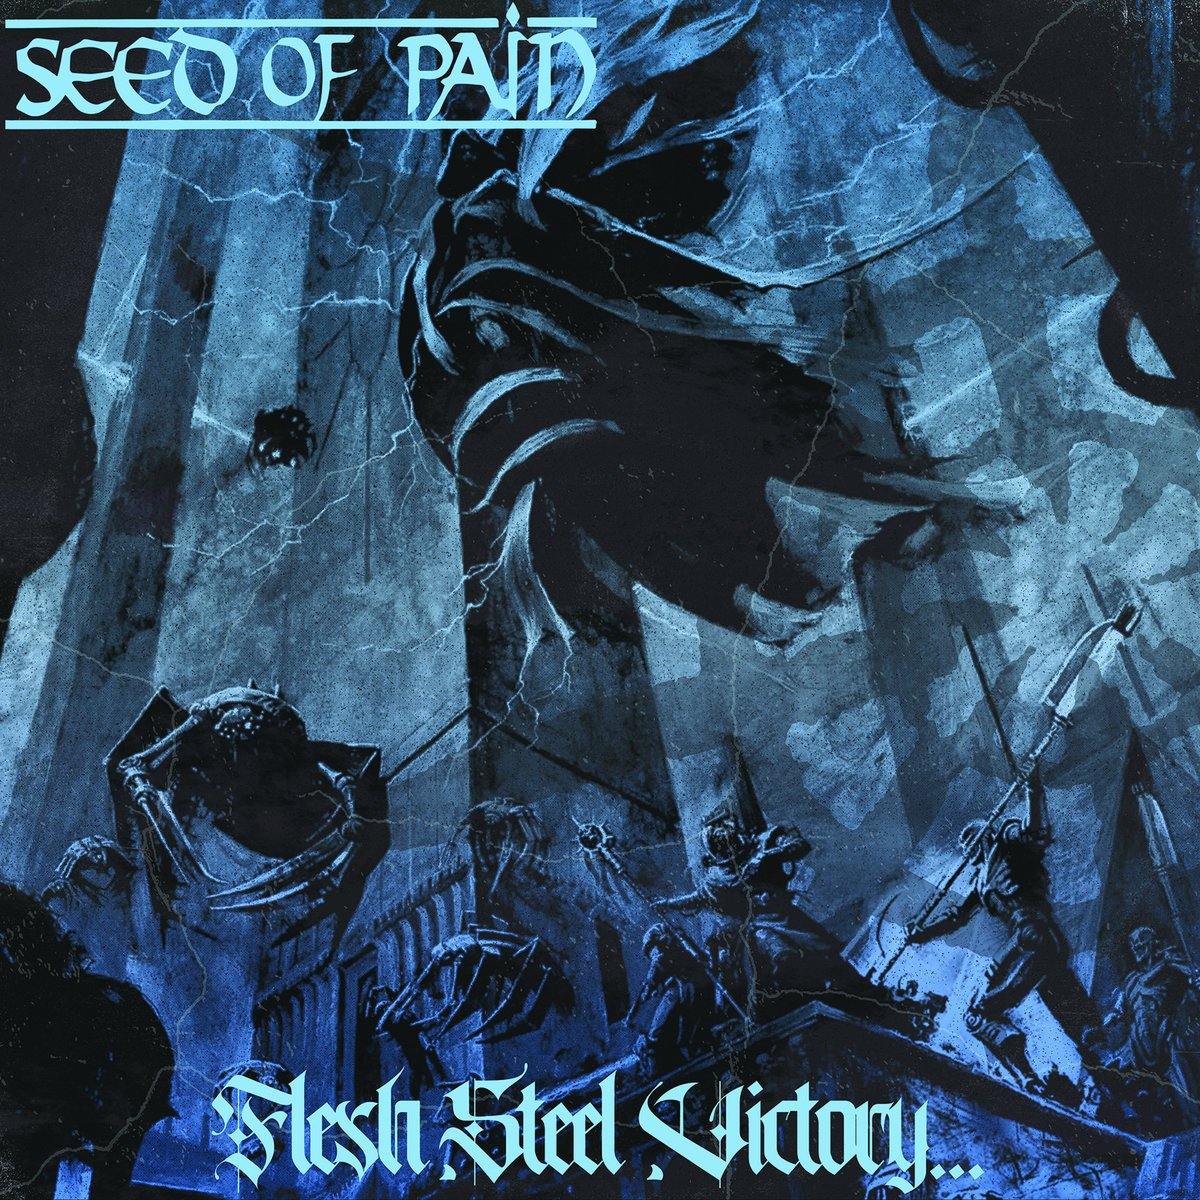 Buy – Seed of Pain "Flesh, Steel, Victory..." 12" – Band & Music Merch – Cold Cuts Merch